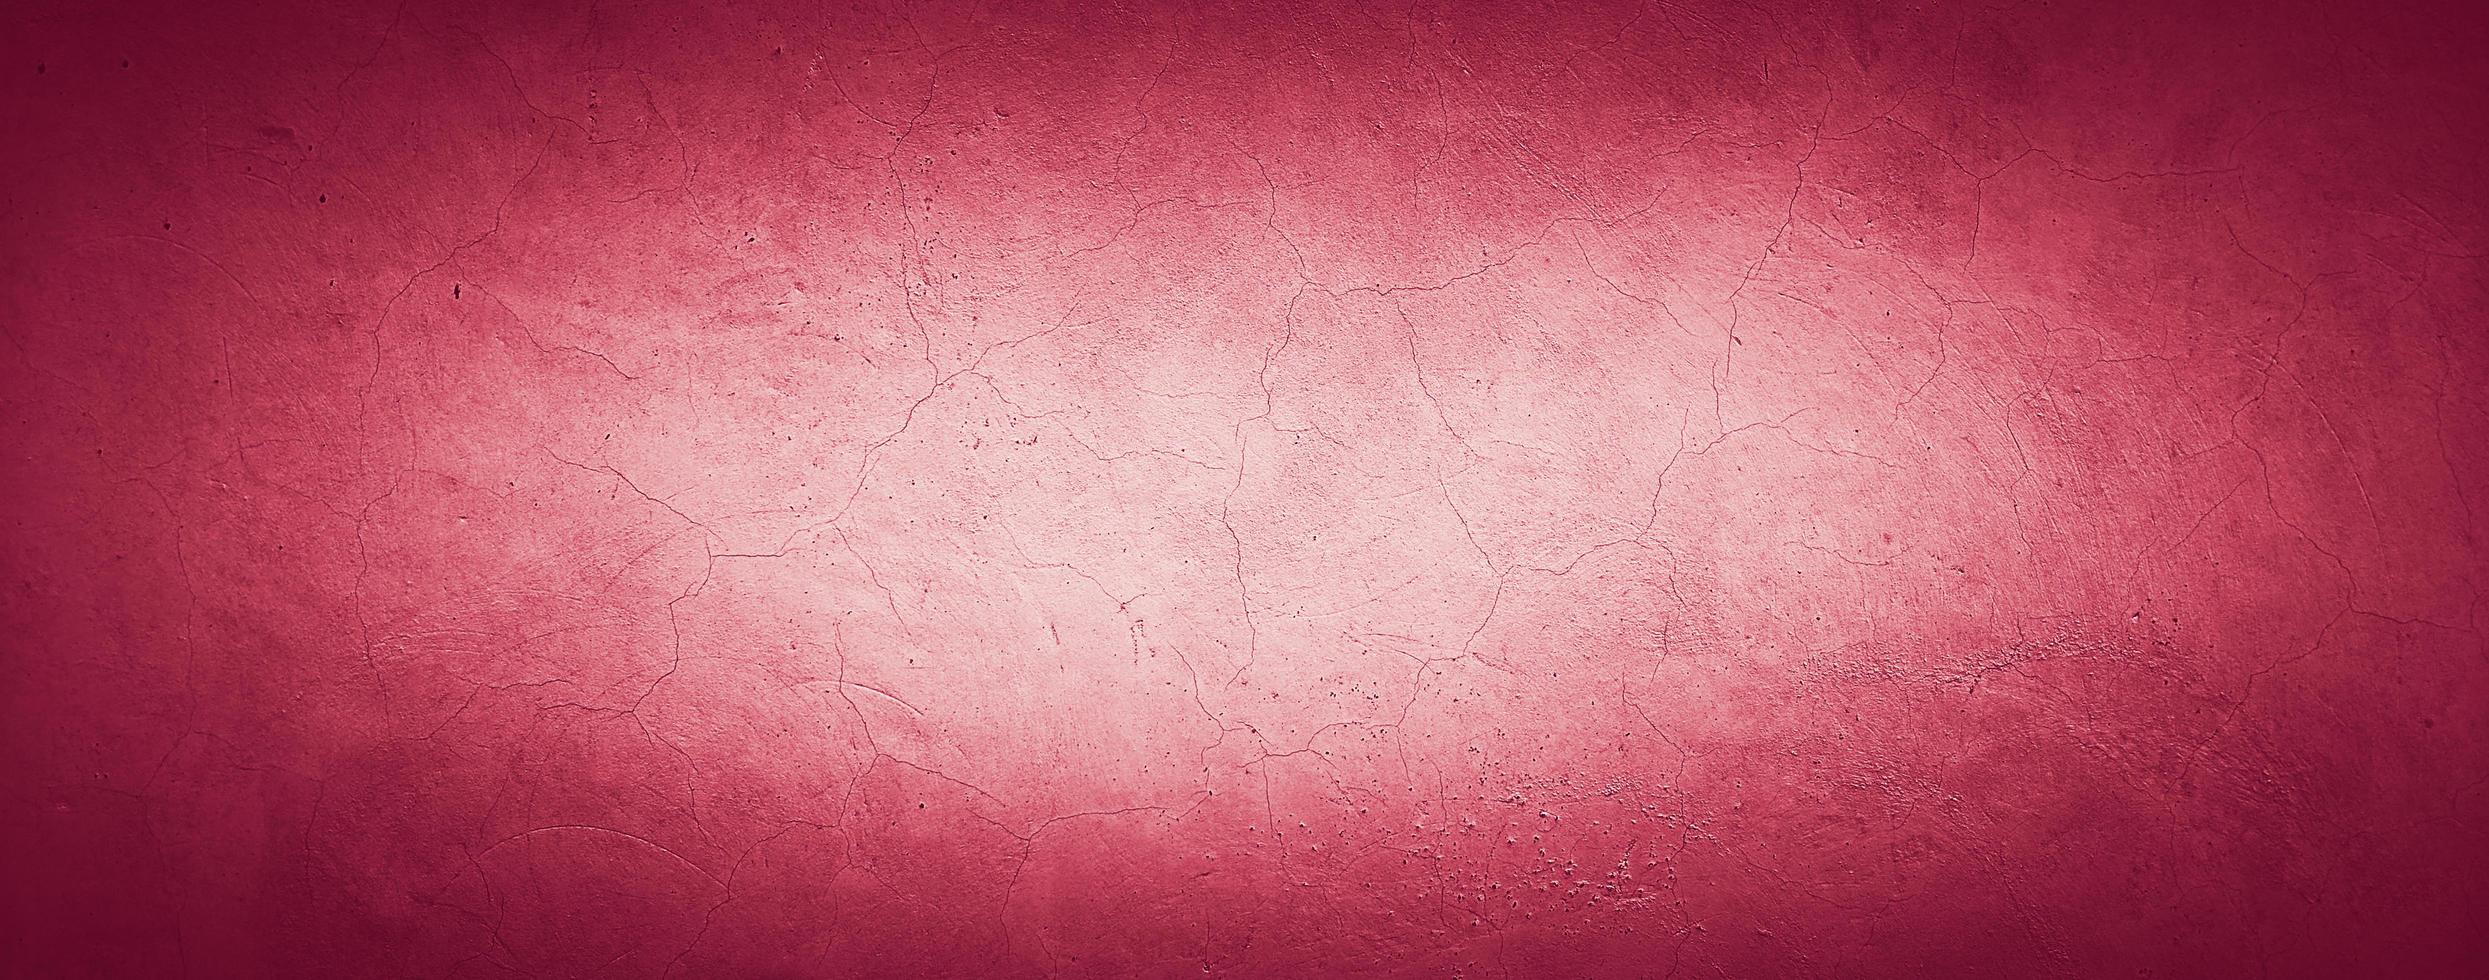 red abstract painted concrete wall texture background photo